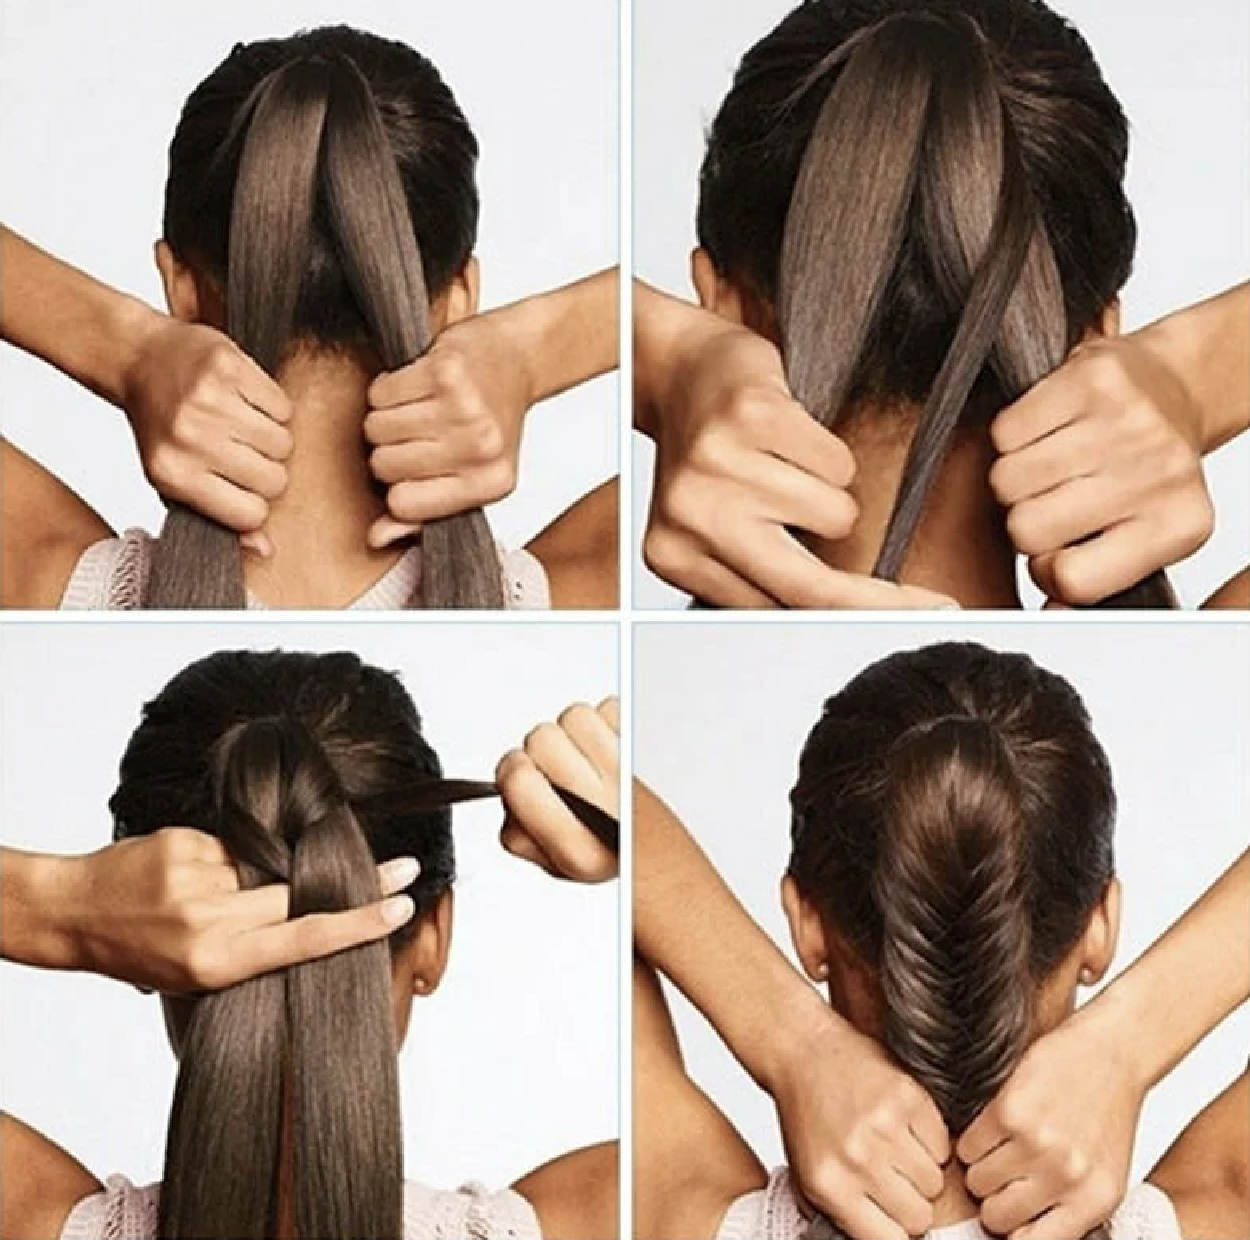 A fishtail braid is a simple and practical hairstyle